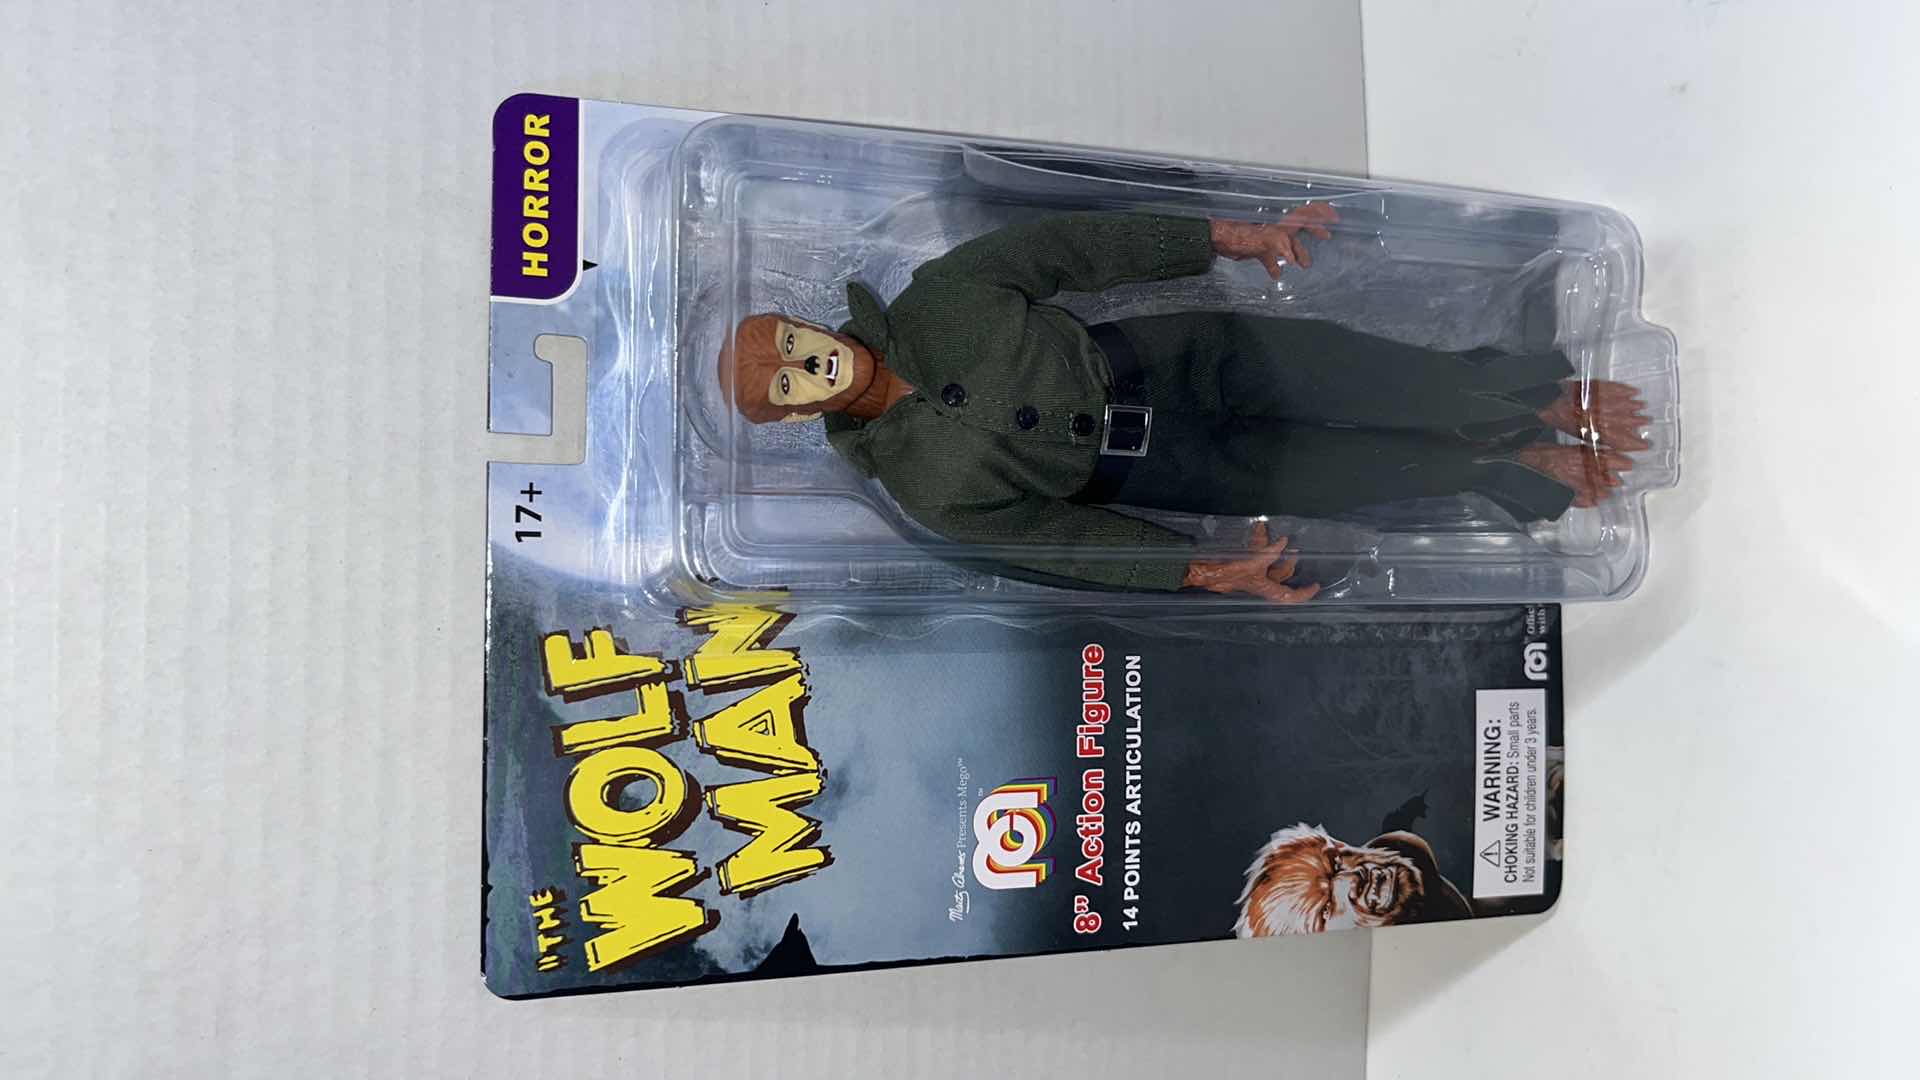 Photo 4 of NIB WORLDS GREATEST MEGO MONSTERS 8” ACTION FIGURE, CREATURE FROM THE BLACK LAGOON & THE WOLF MAN (2)